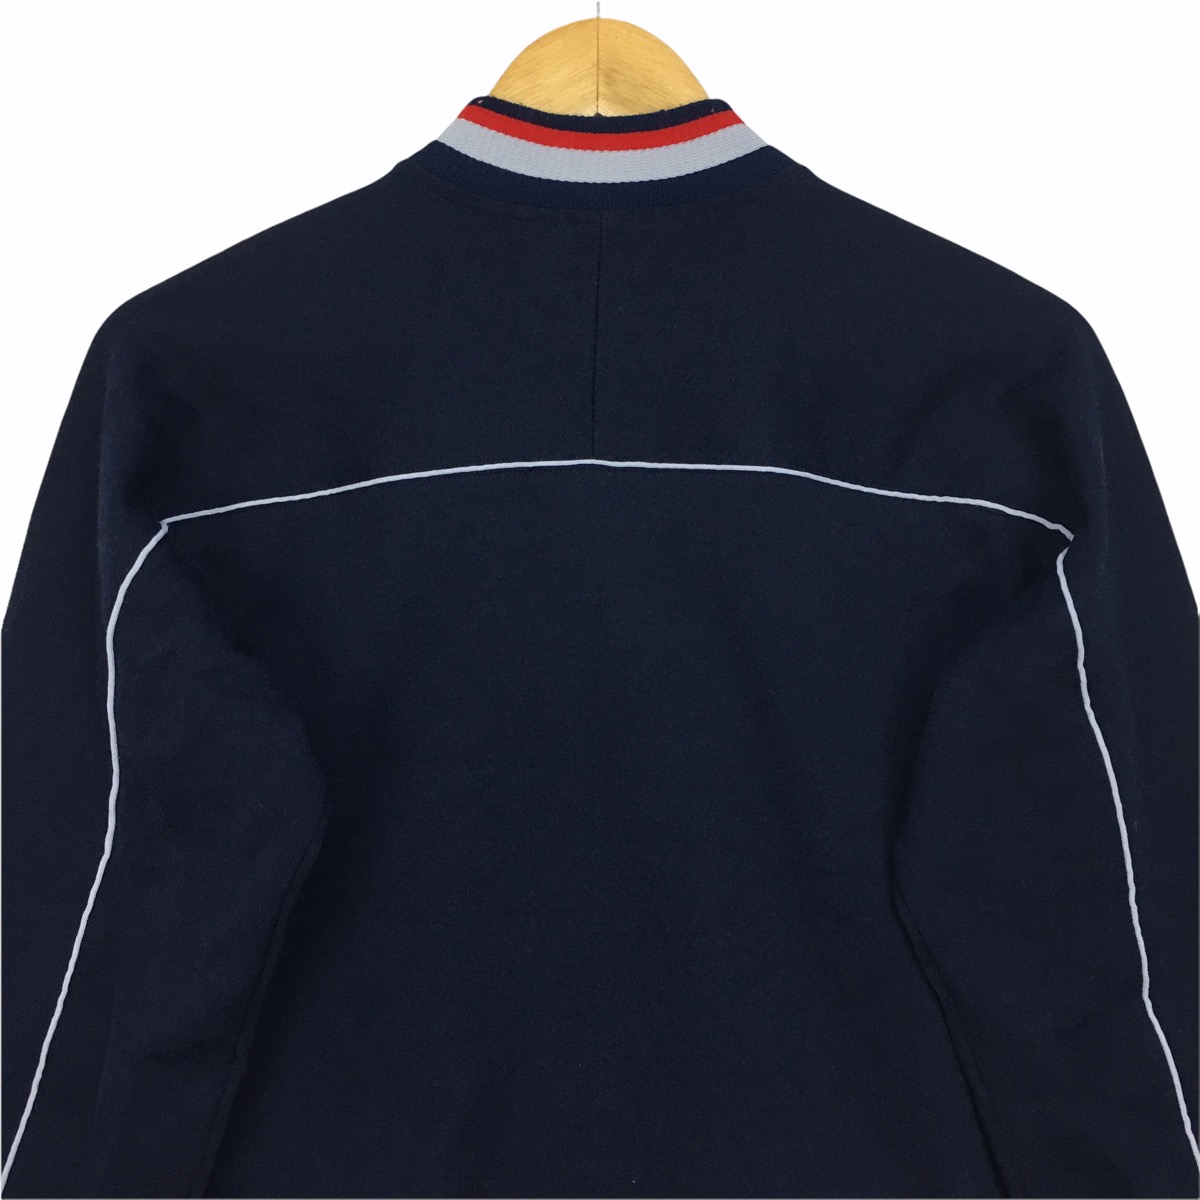 ASICS Zip Up Sweater Streetwear Clothing Made in Japan - 7